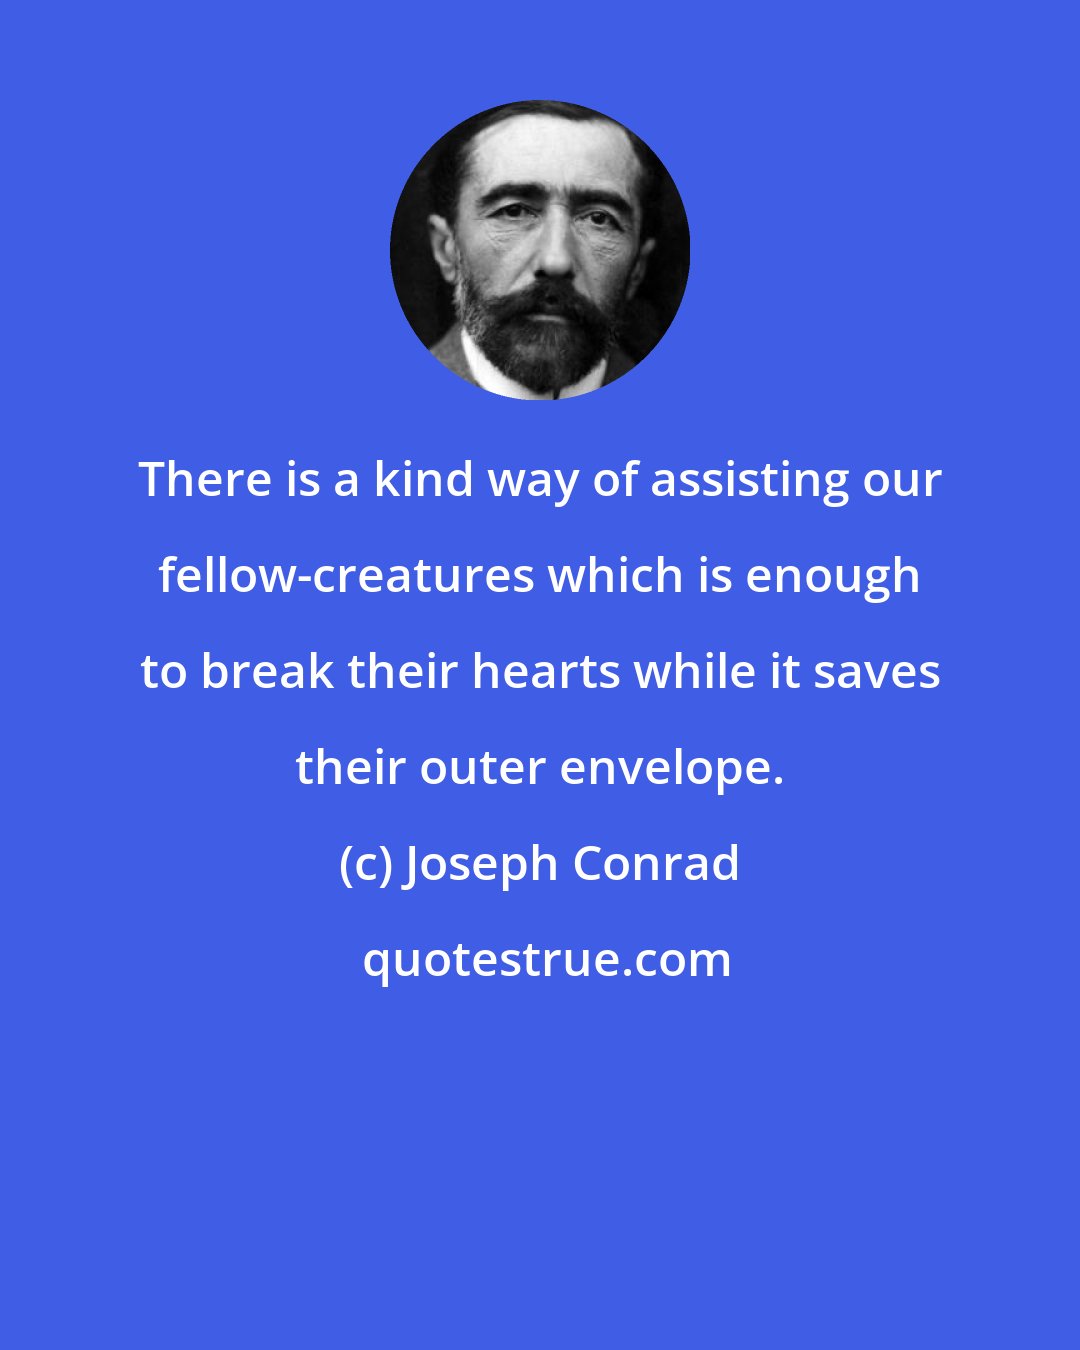 Joseph Conrad: There is a kind way of assisting our fellow-creatures which is enough to break their hearts while it saves their outer envelope.